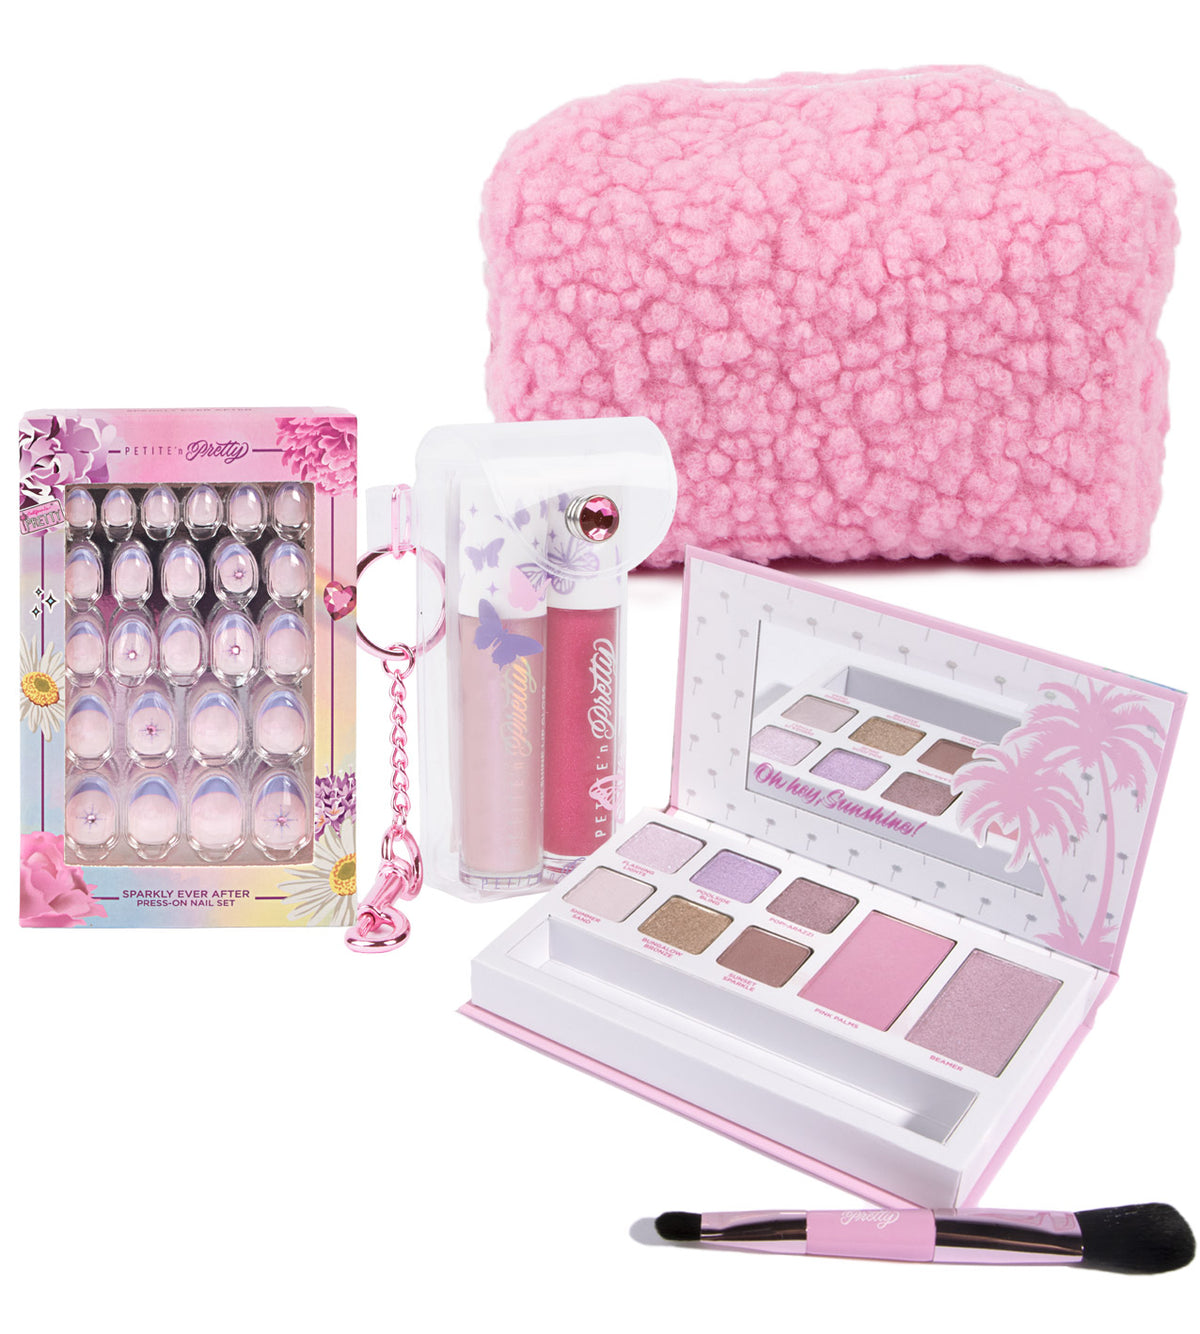 T.Y.A Makeup Kit - Price in India, Buy T.Y.A Makeup Kit Online In India,  Reviews, Ratings & Features | Flipkart.com